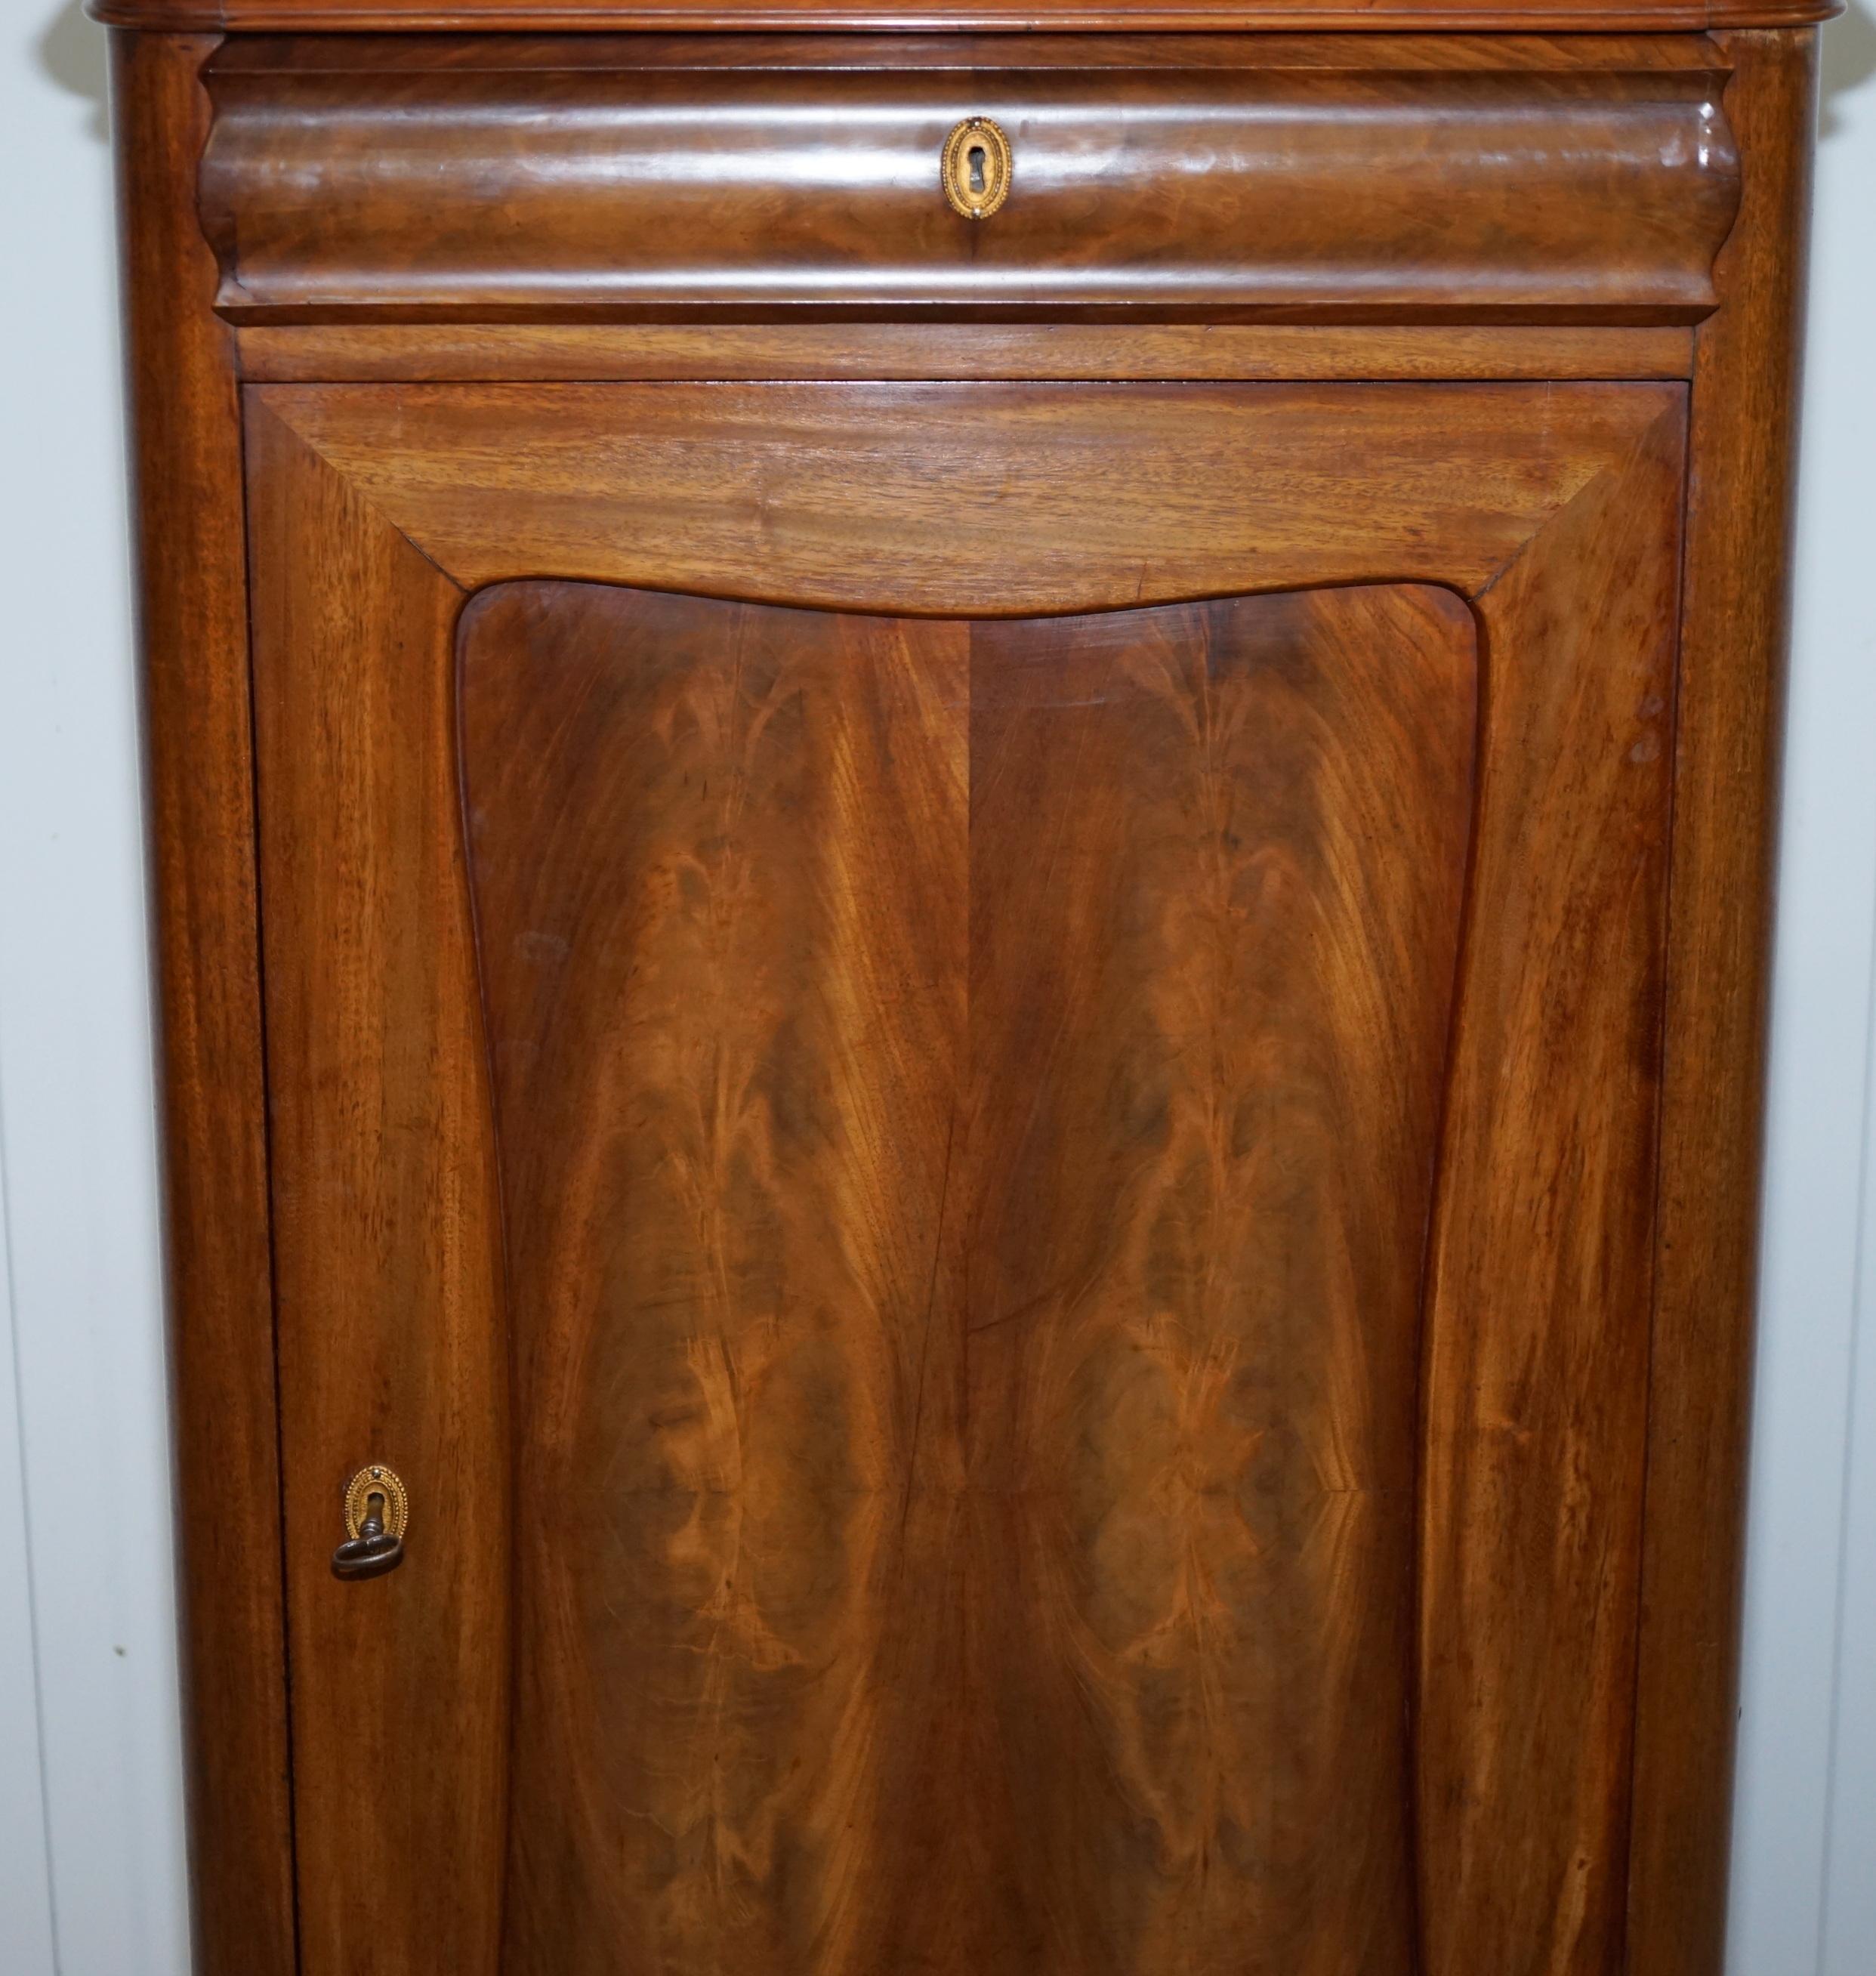 Lovely Walnut Drinks Cabinet with Drawers and Built in Glass Holder Great Find 1